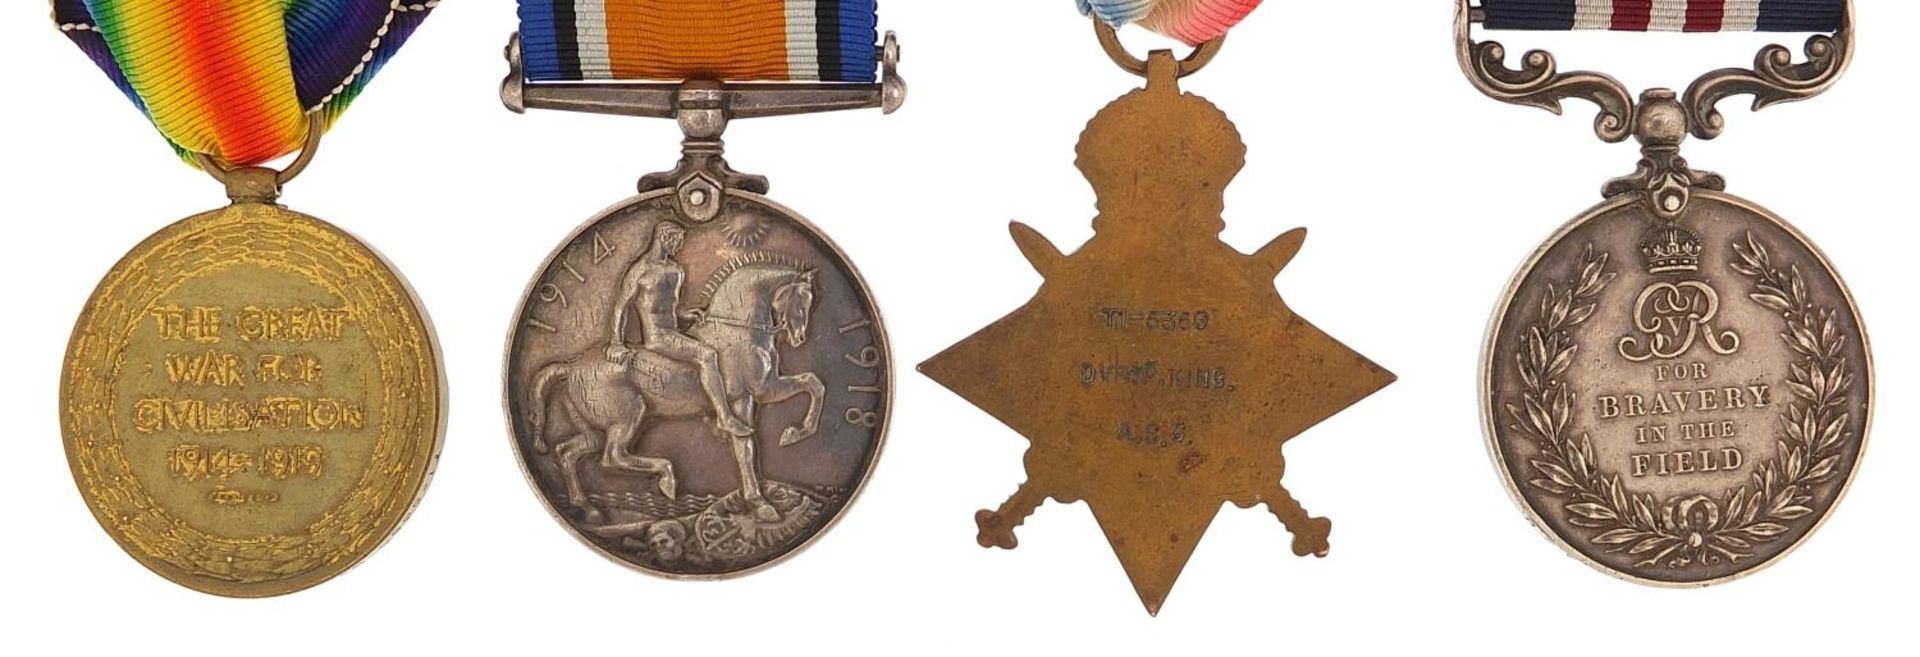 British military World War I four medal group with related ephemera including a Mons Star and George - Image 7 of 10